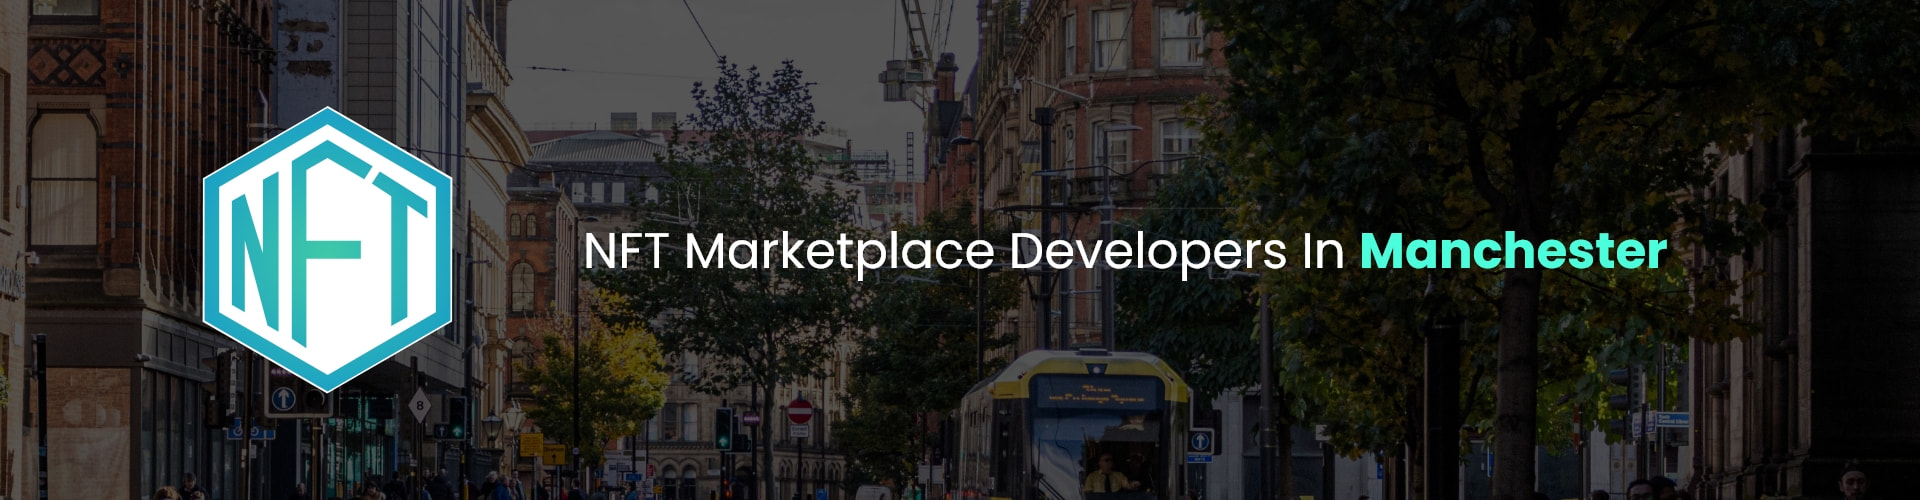 hire nft marketplace developers in manchester